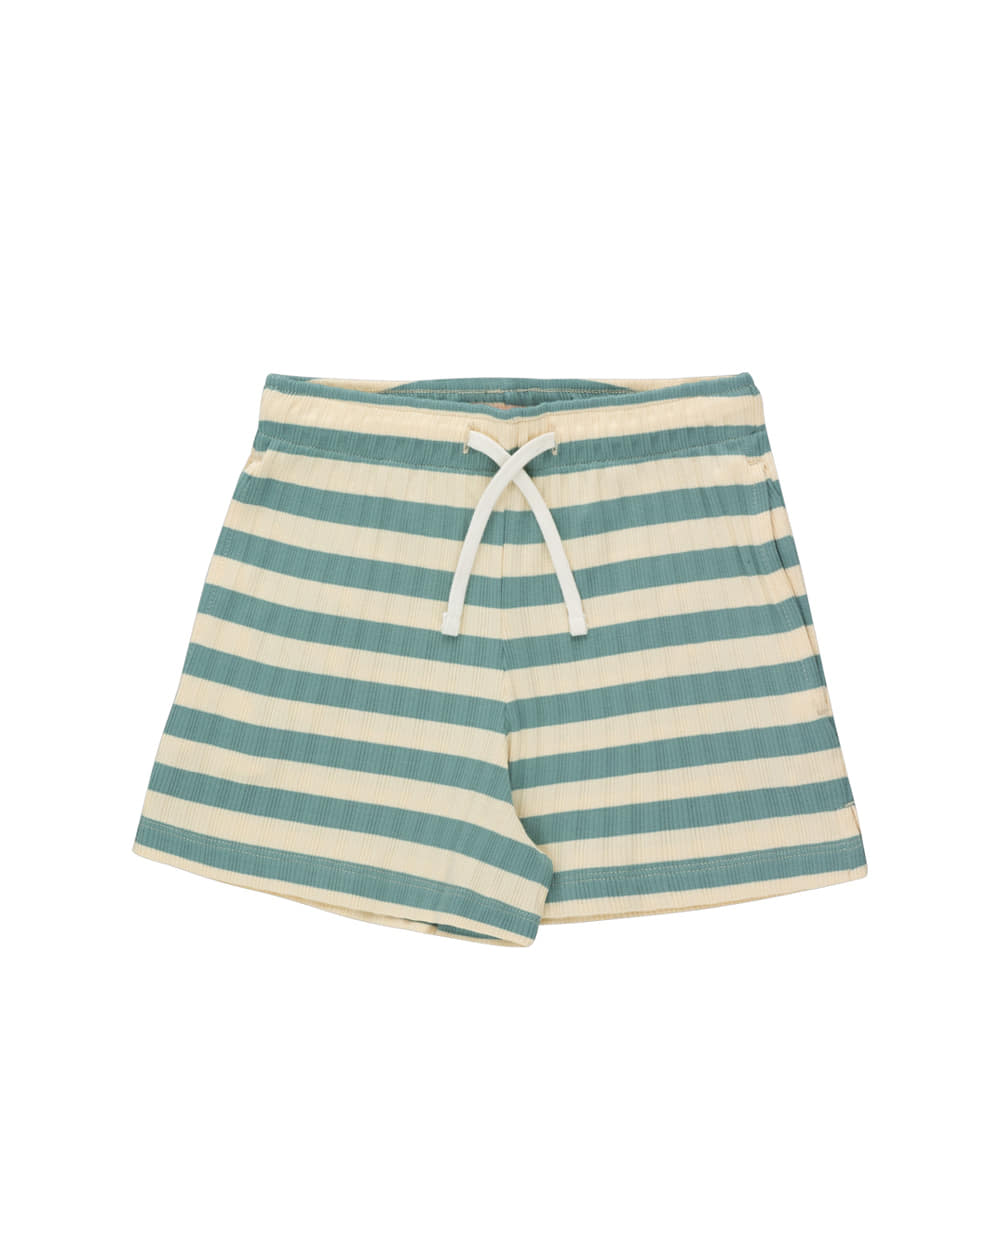 [TINYCOTTONS]STRIPES SHORT/pastel yellow/light teal